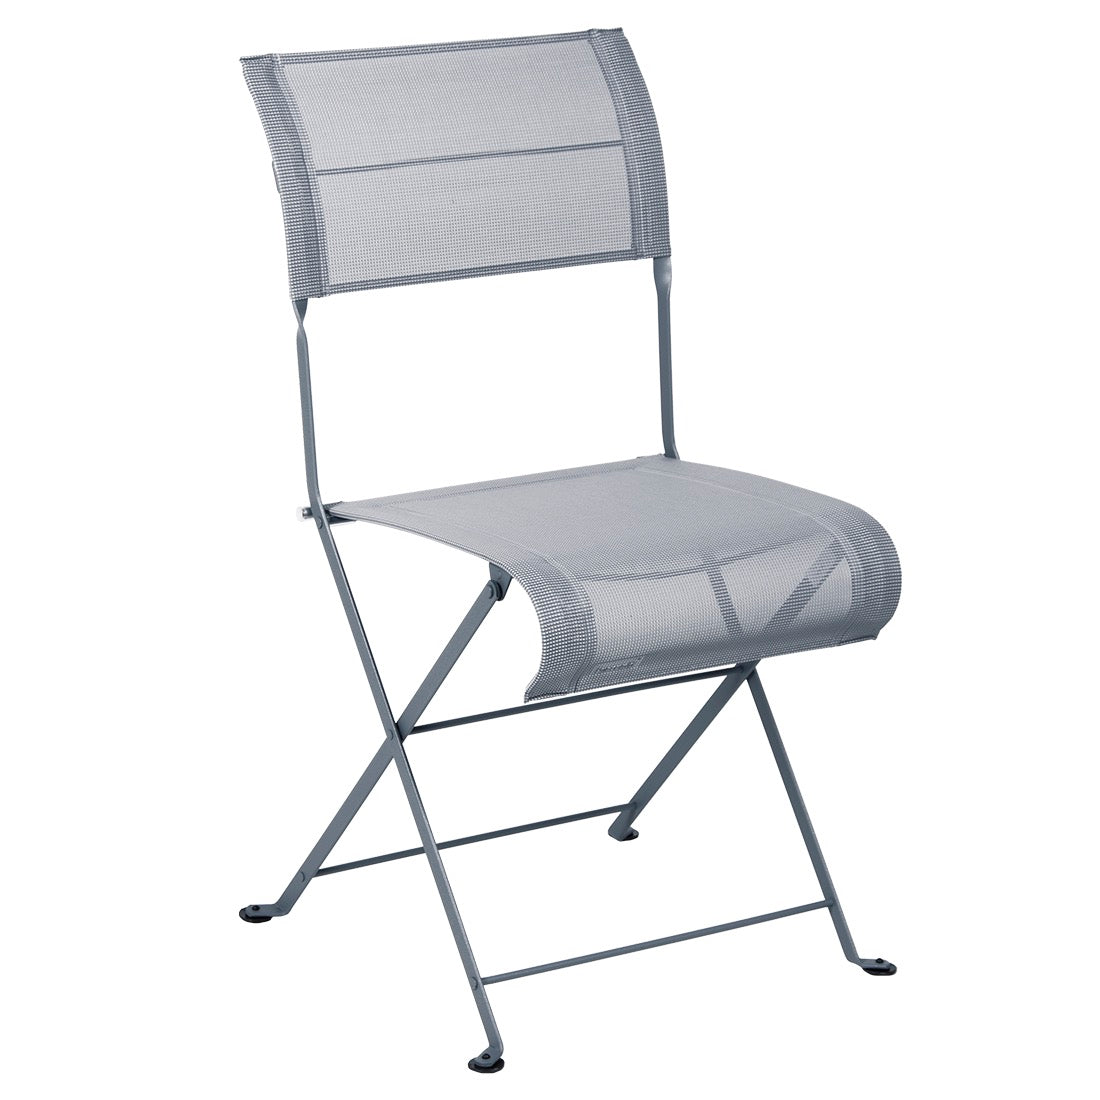 Fermob Dune Premium Chair with Batyline Stereo OTF outdoor fabric